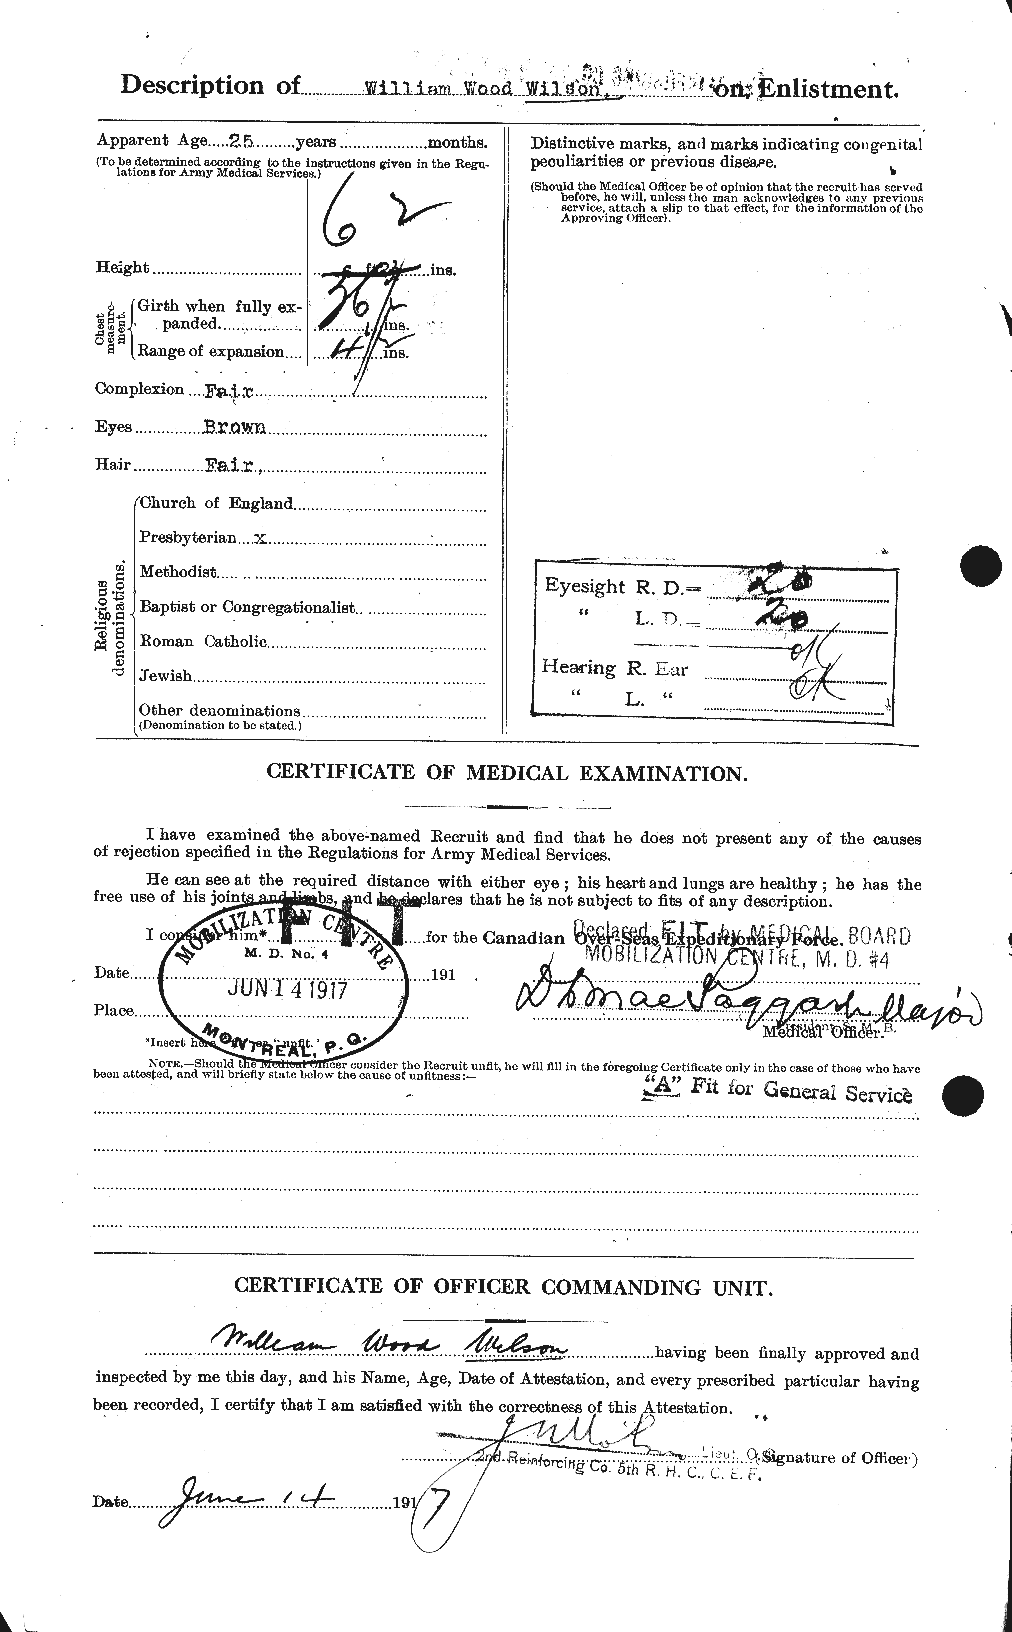 Personnel Records of the First World War - CEF 684120b